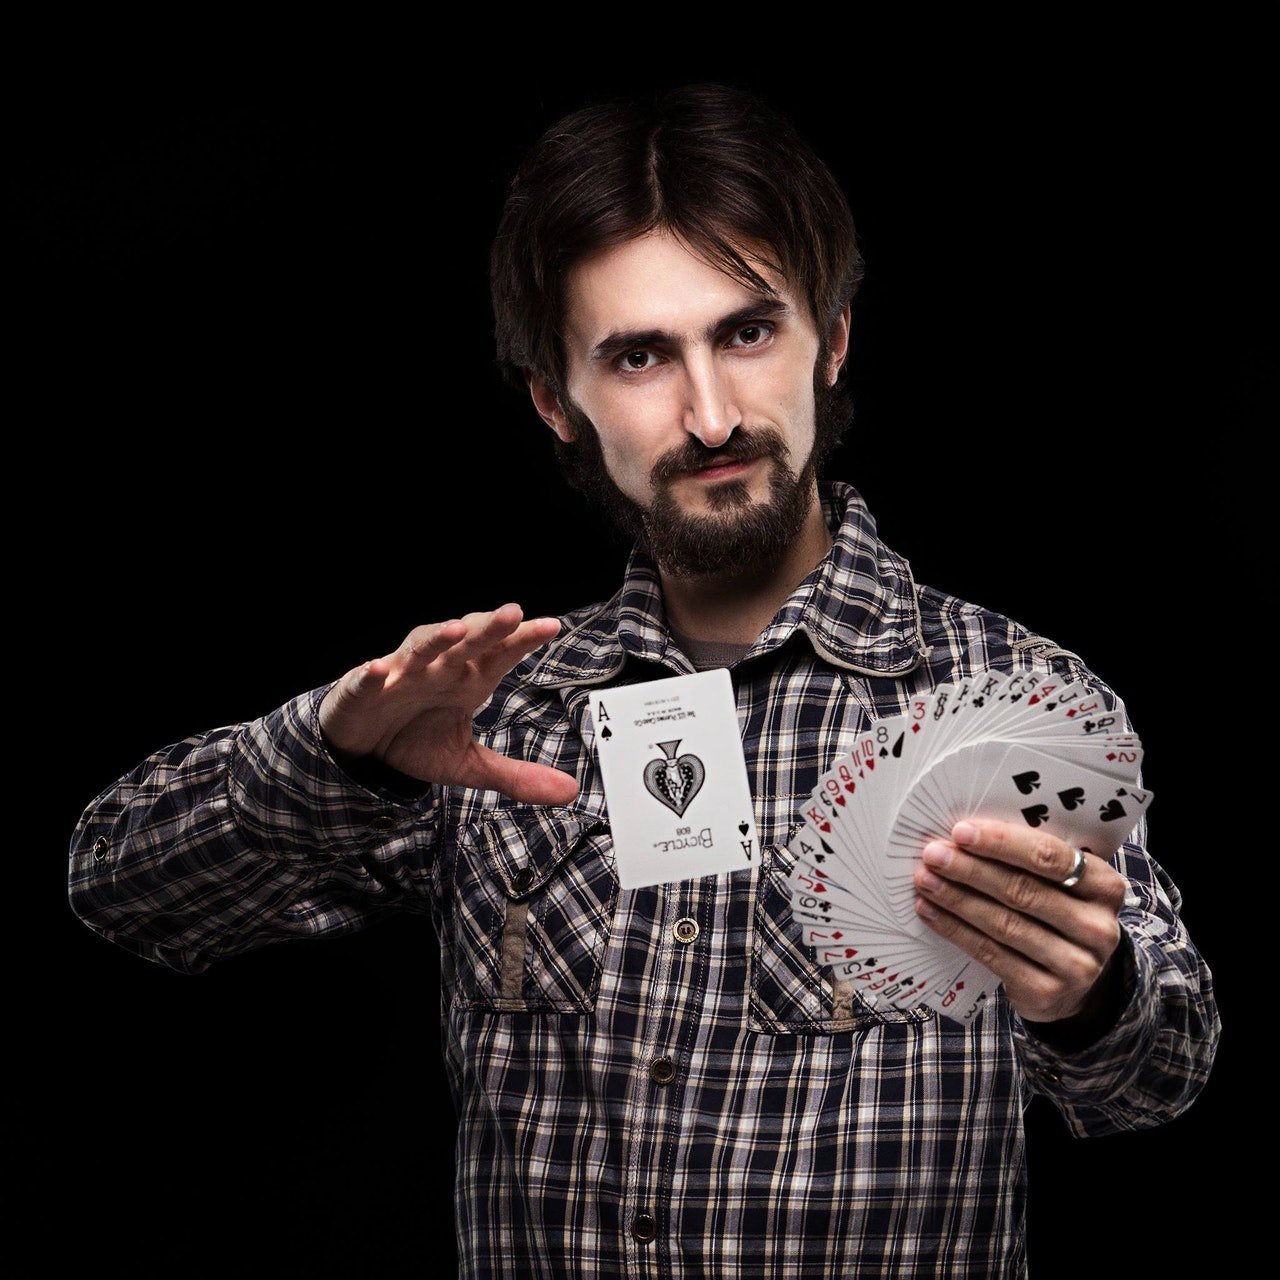 Photo of a magician holding a deck of cards | Photo: Pexels